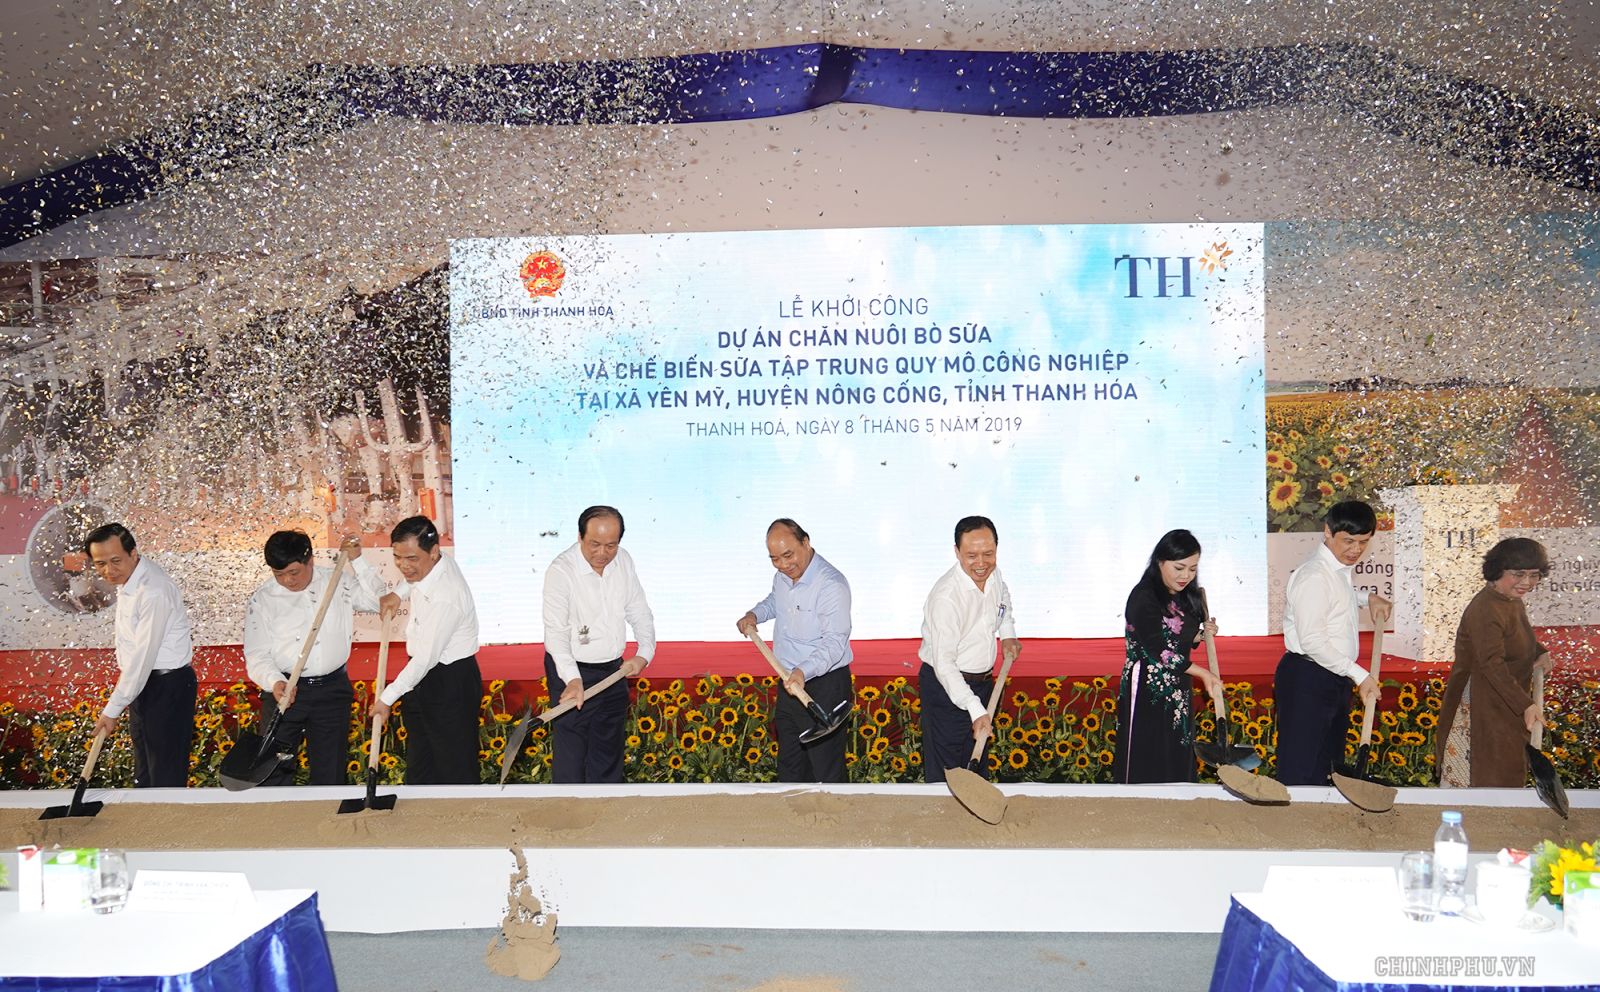 Prime Minister Nguyen Xuan Phuc (fourth from left) breaks ground for the dairy farm project developed by TH in Thanh Hoa province. (Photo: VGP)